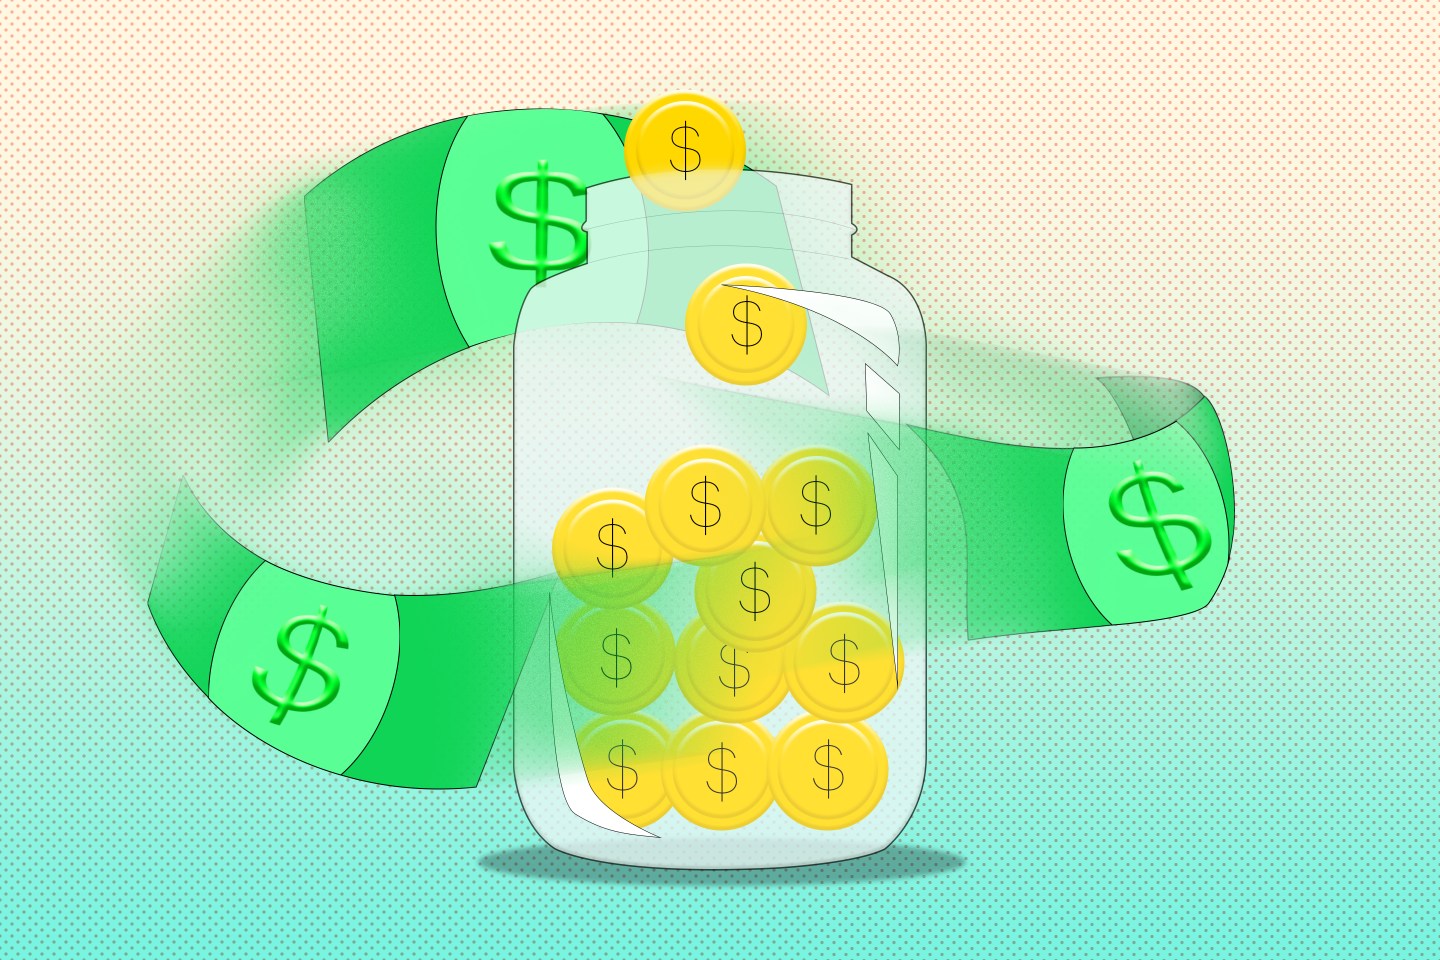 Vector illustration of a glass jar full of gold coins and three dollar bills flying in a circle surrounding the jar.